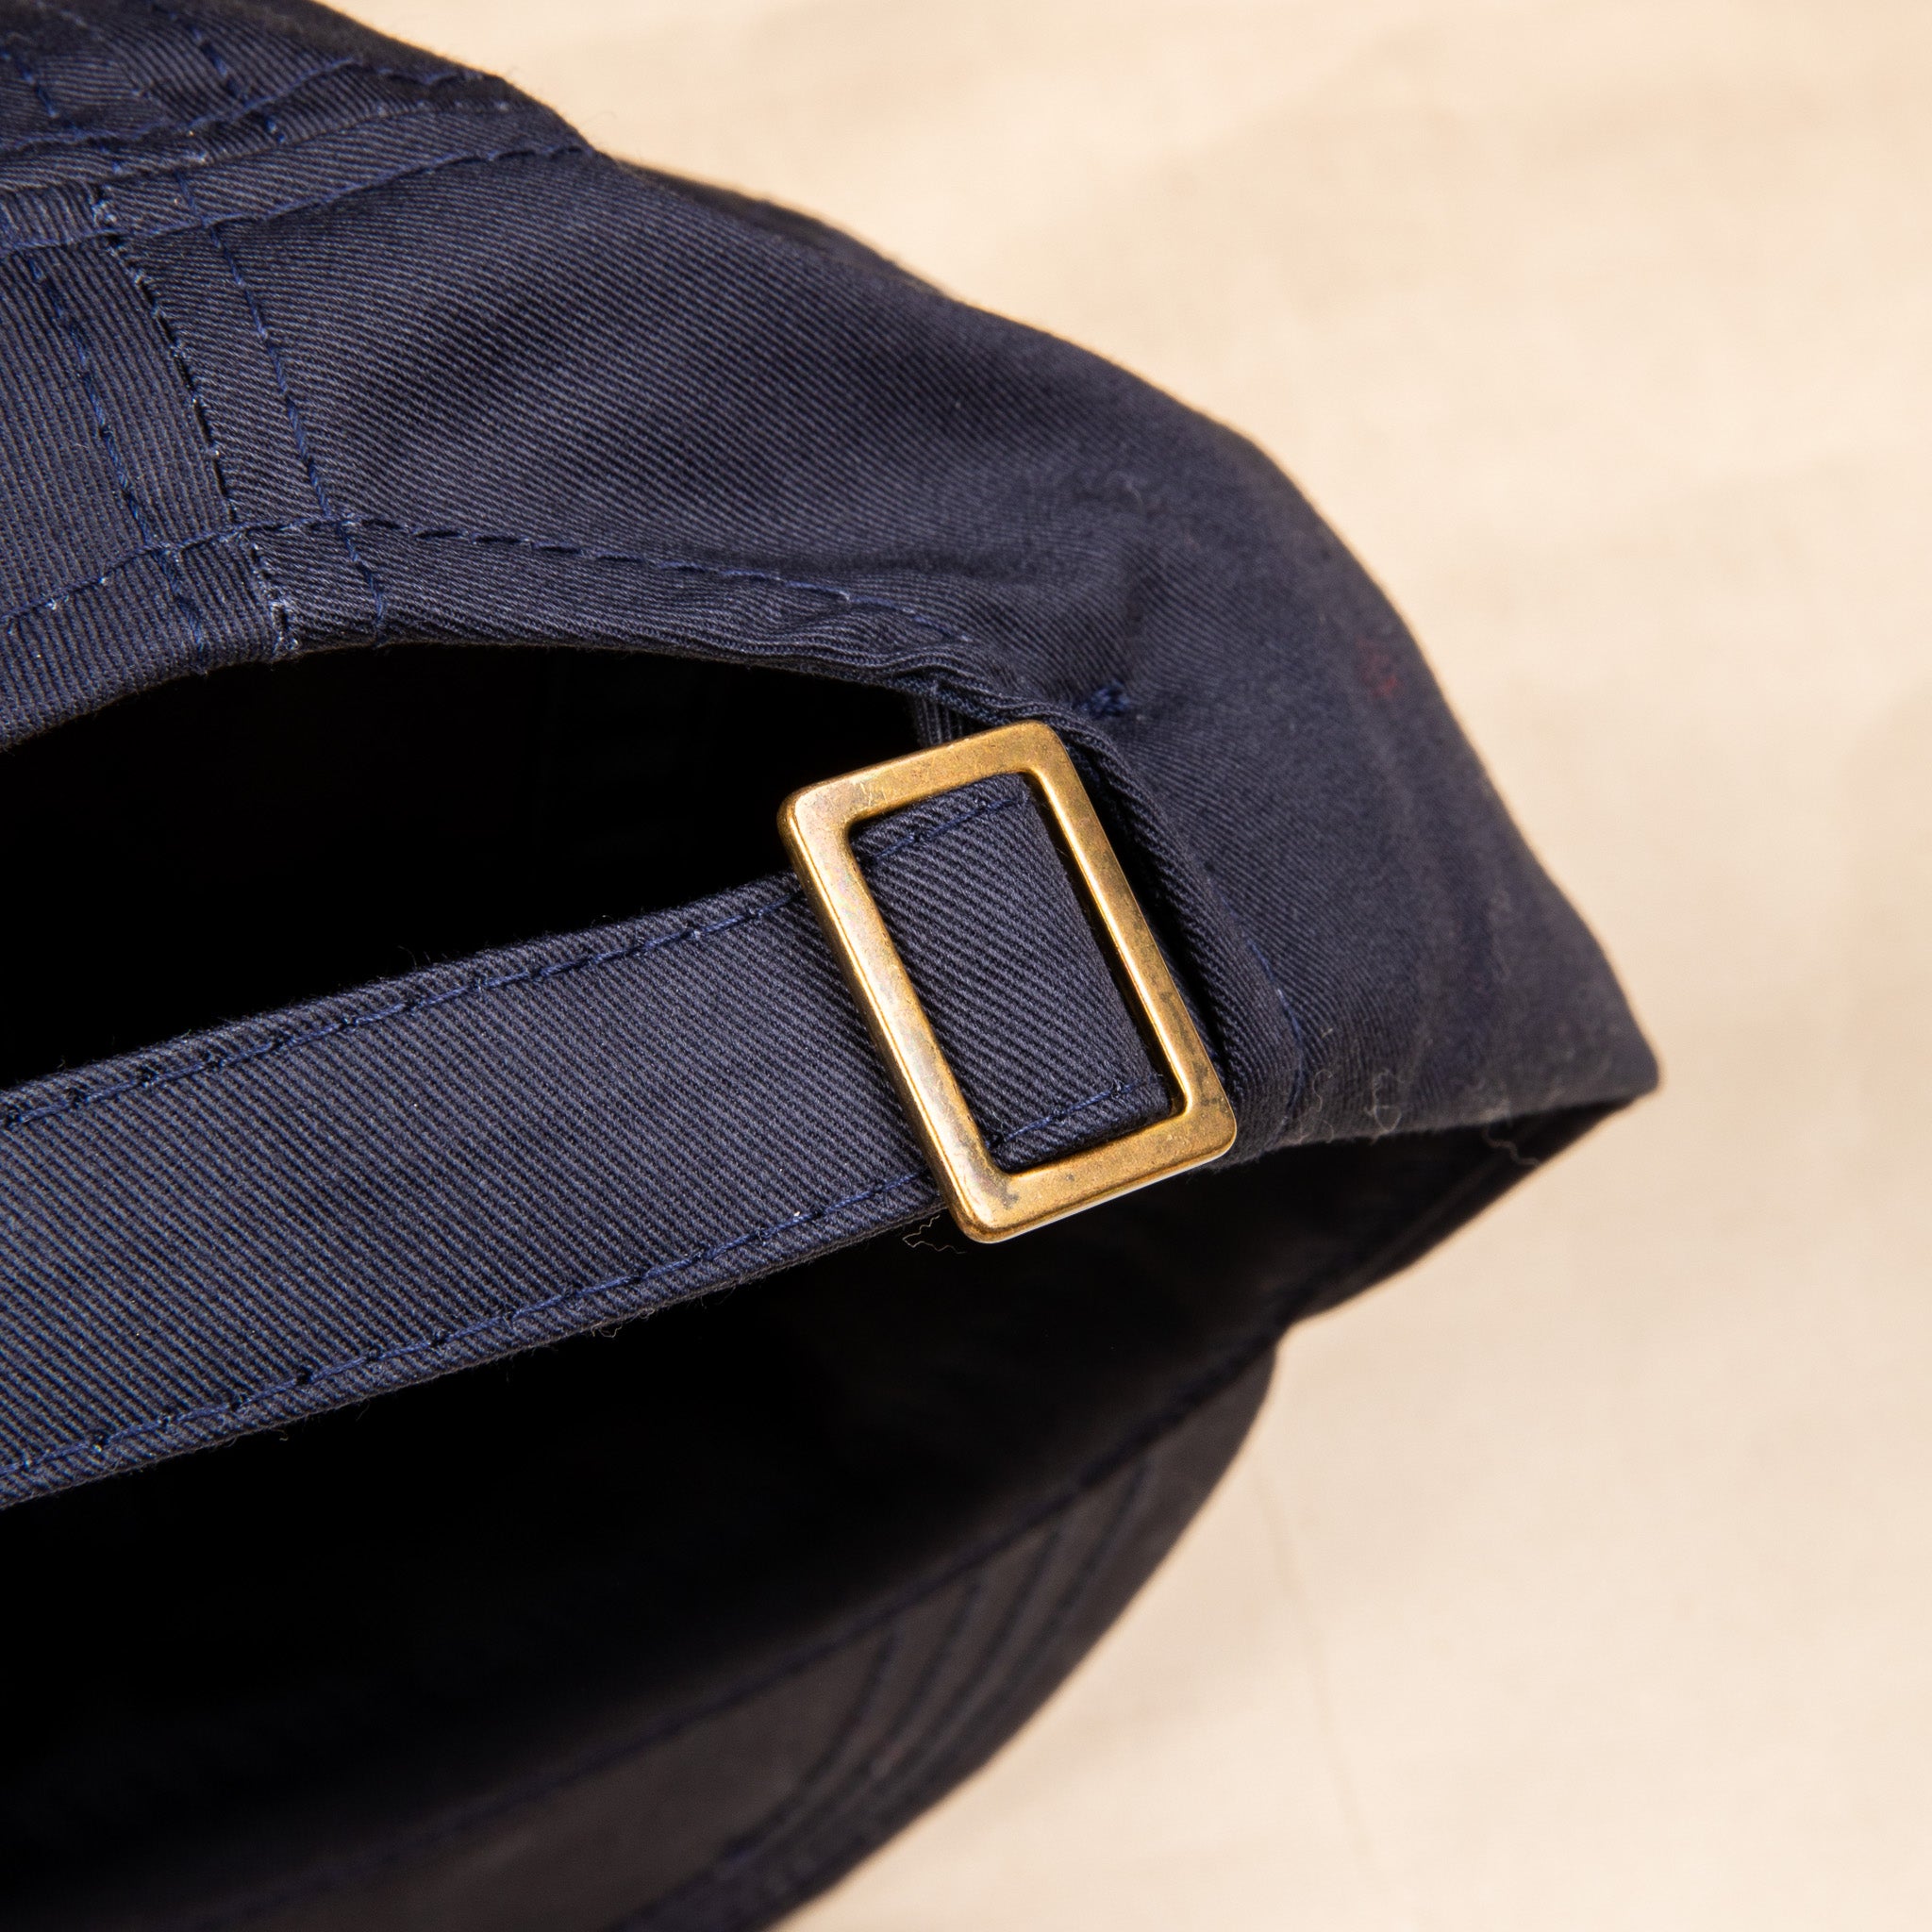 H.W. Dog &amp; Co for BSC Uniform Utility Cap Navy